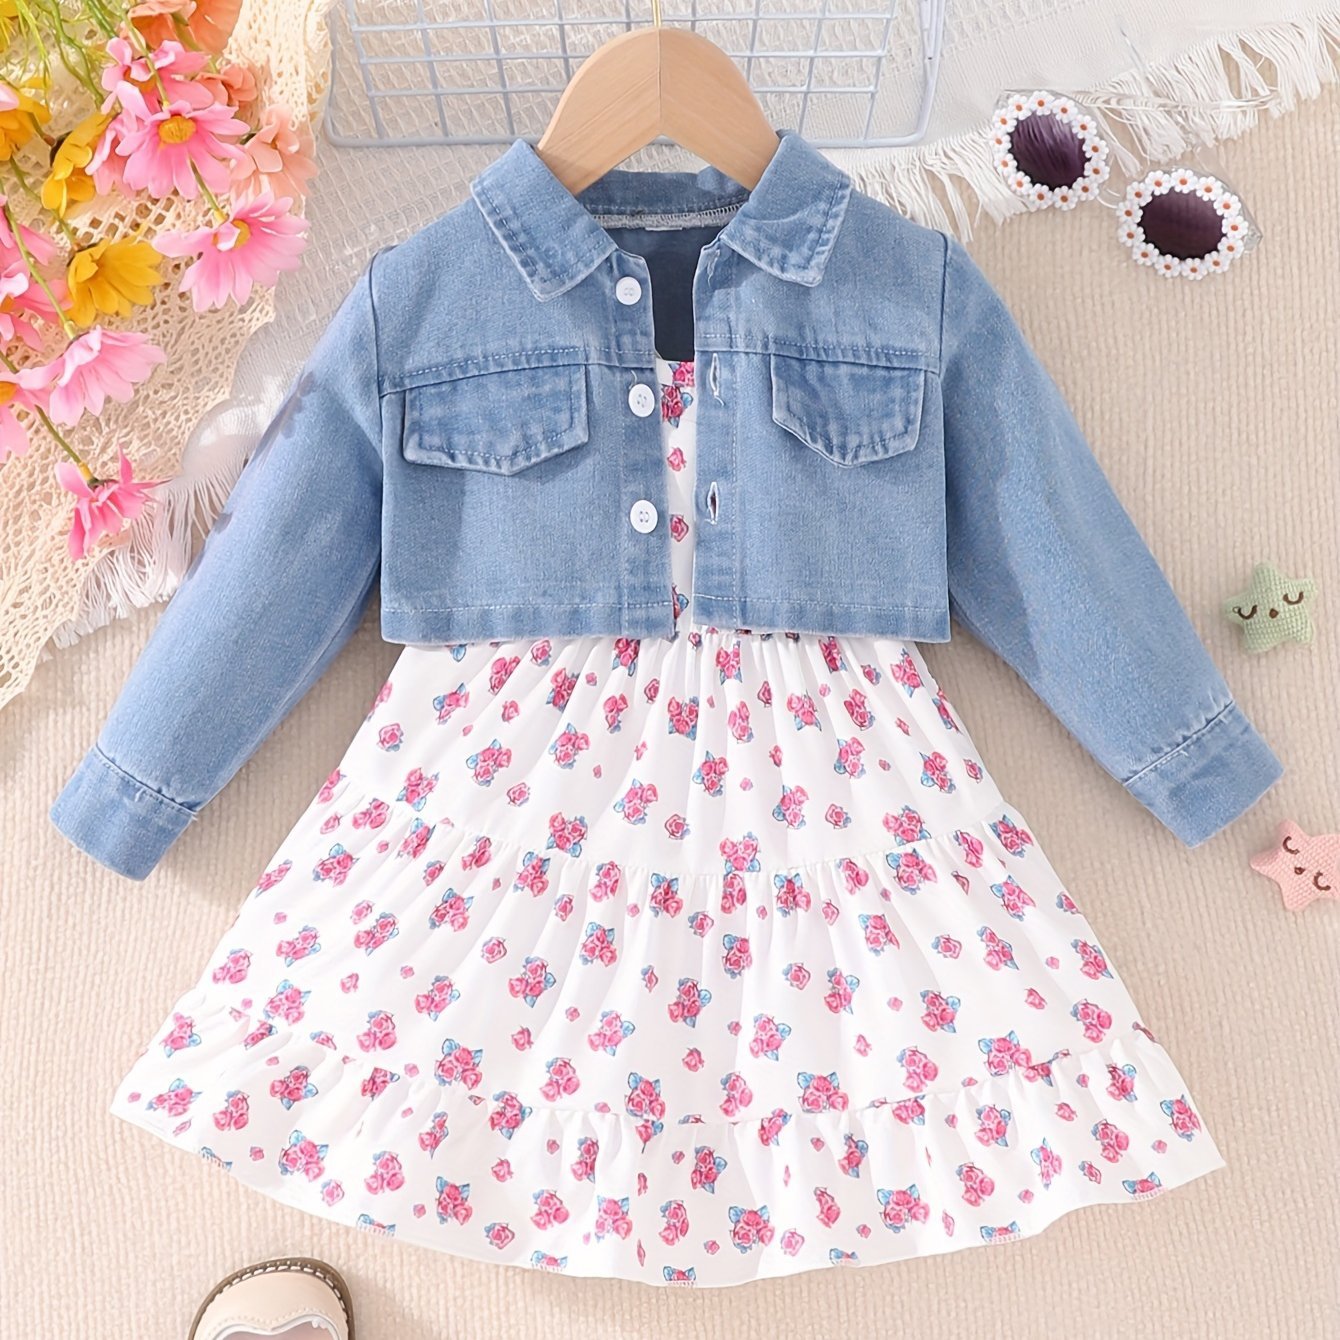 2pcs Adorable Baby Girls Denim Jacket Outfit - Stylish Floral Cami Dress with Button Front Jacket - Comfortable & Versatile 2 - Piece Set for Infant & Toddler Fashionistas - Ammpoure Wellbeing